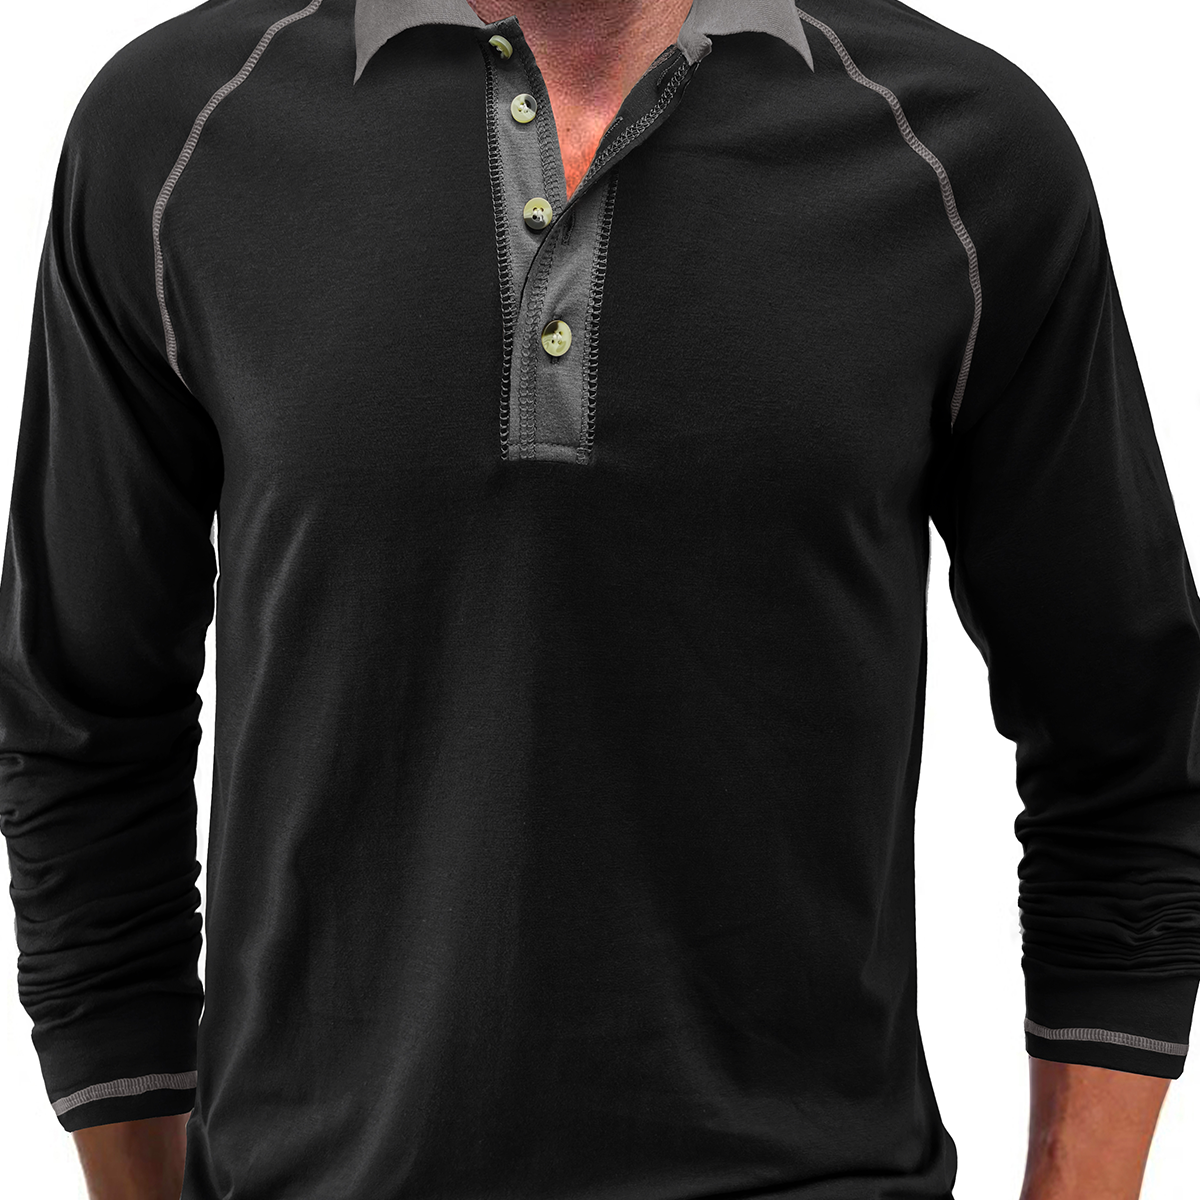 Men's Golf Solid Color Casual Long Sleeve Lapel Polo Shirt